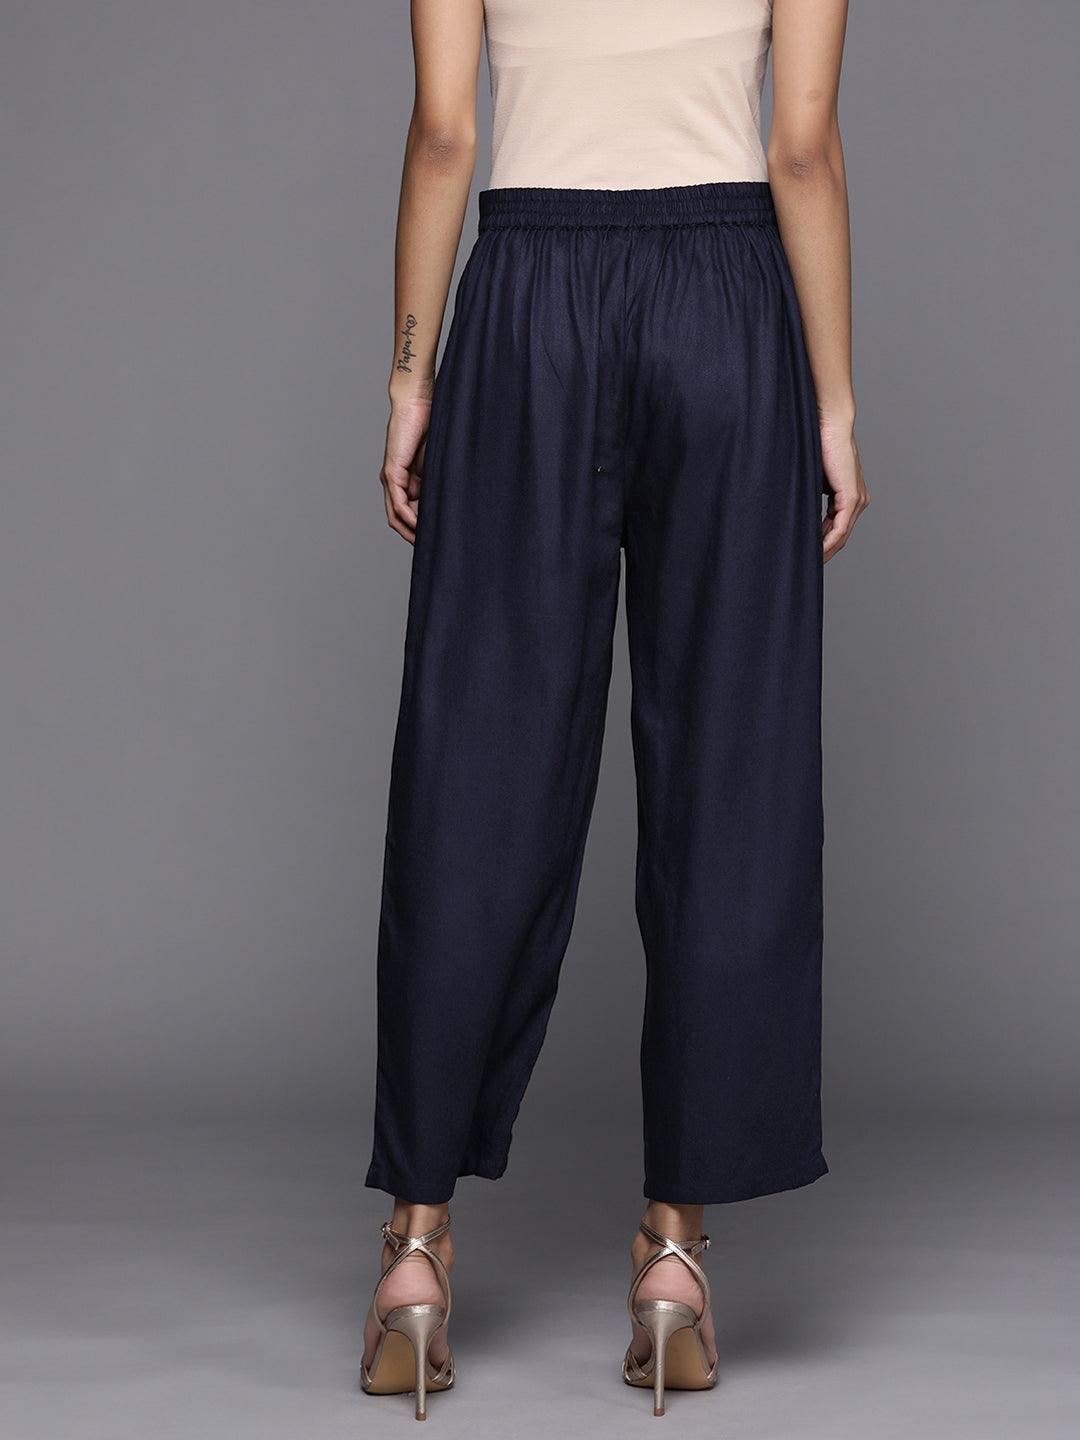 Blue Solid Pashmina Wool Trousers